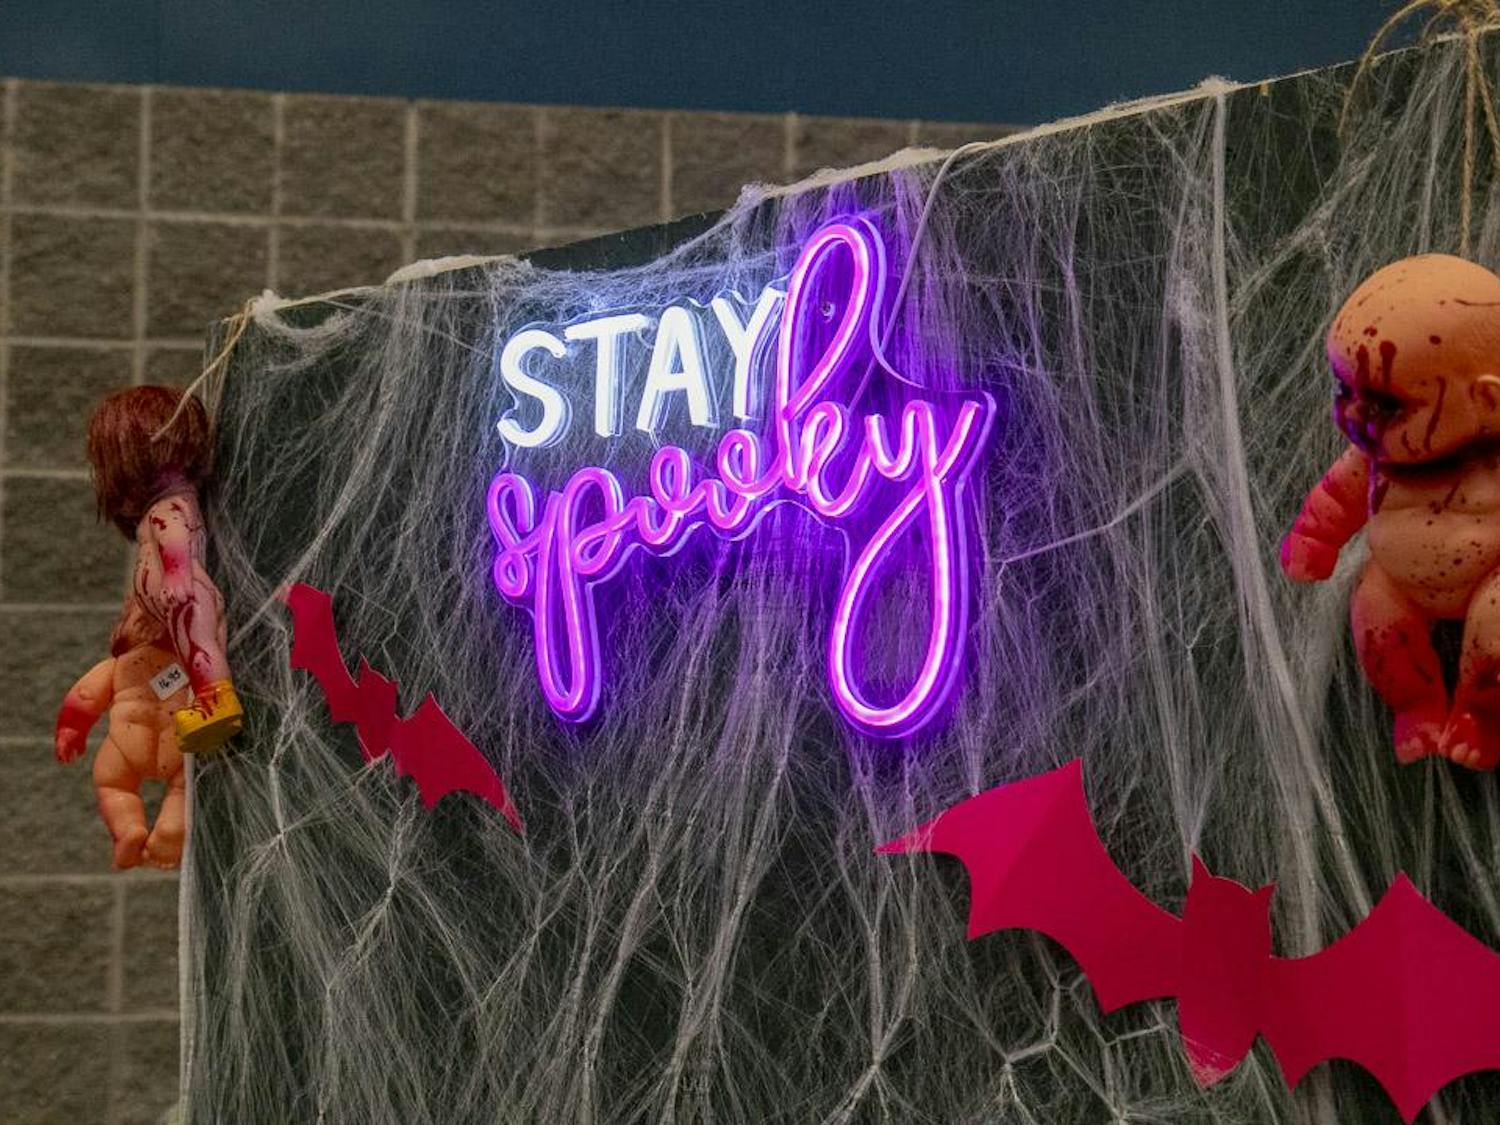 A photo backdrop with bats, bloodied baby dolls and a neon-sign reading "Stay Spooky" sits to the side of The Piercing Parlor booth at the South Carolina Horror Convention on Sept. 16, 2023. The piercing studio is based out of Irmo, South Carolina, and is ran and employed by women.